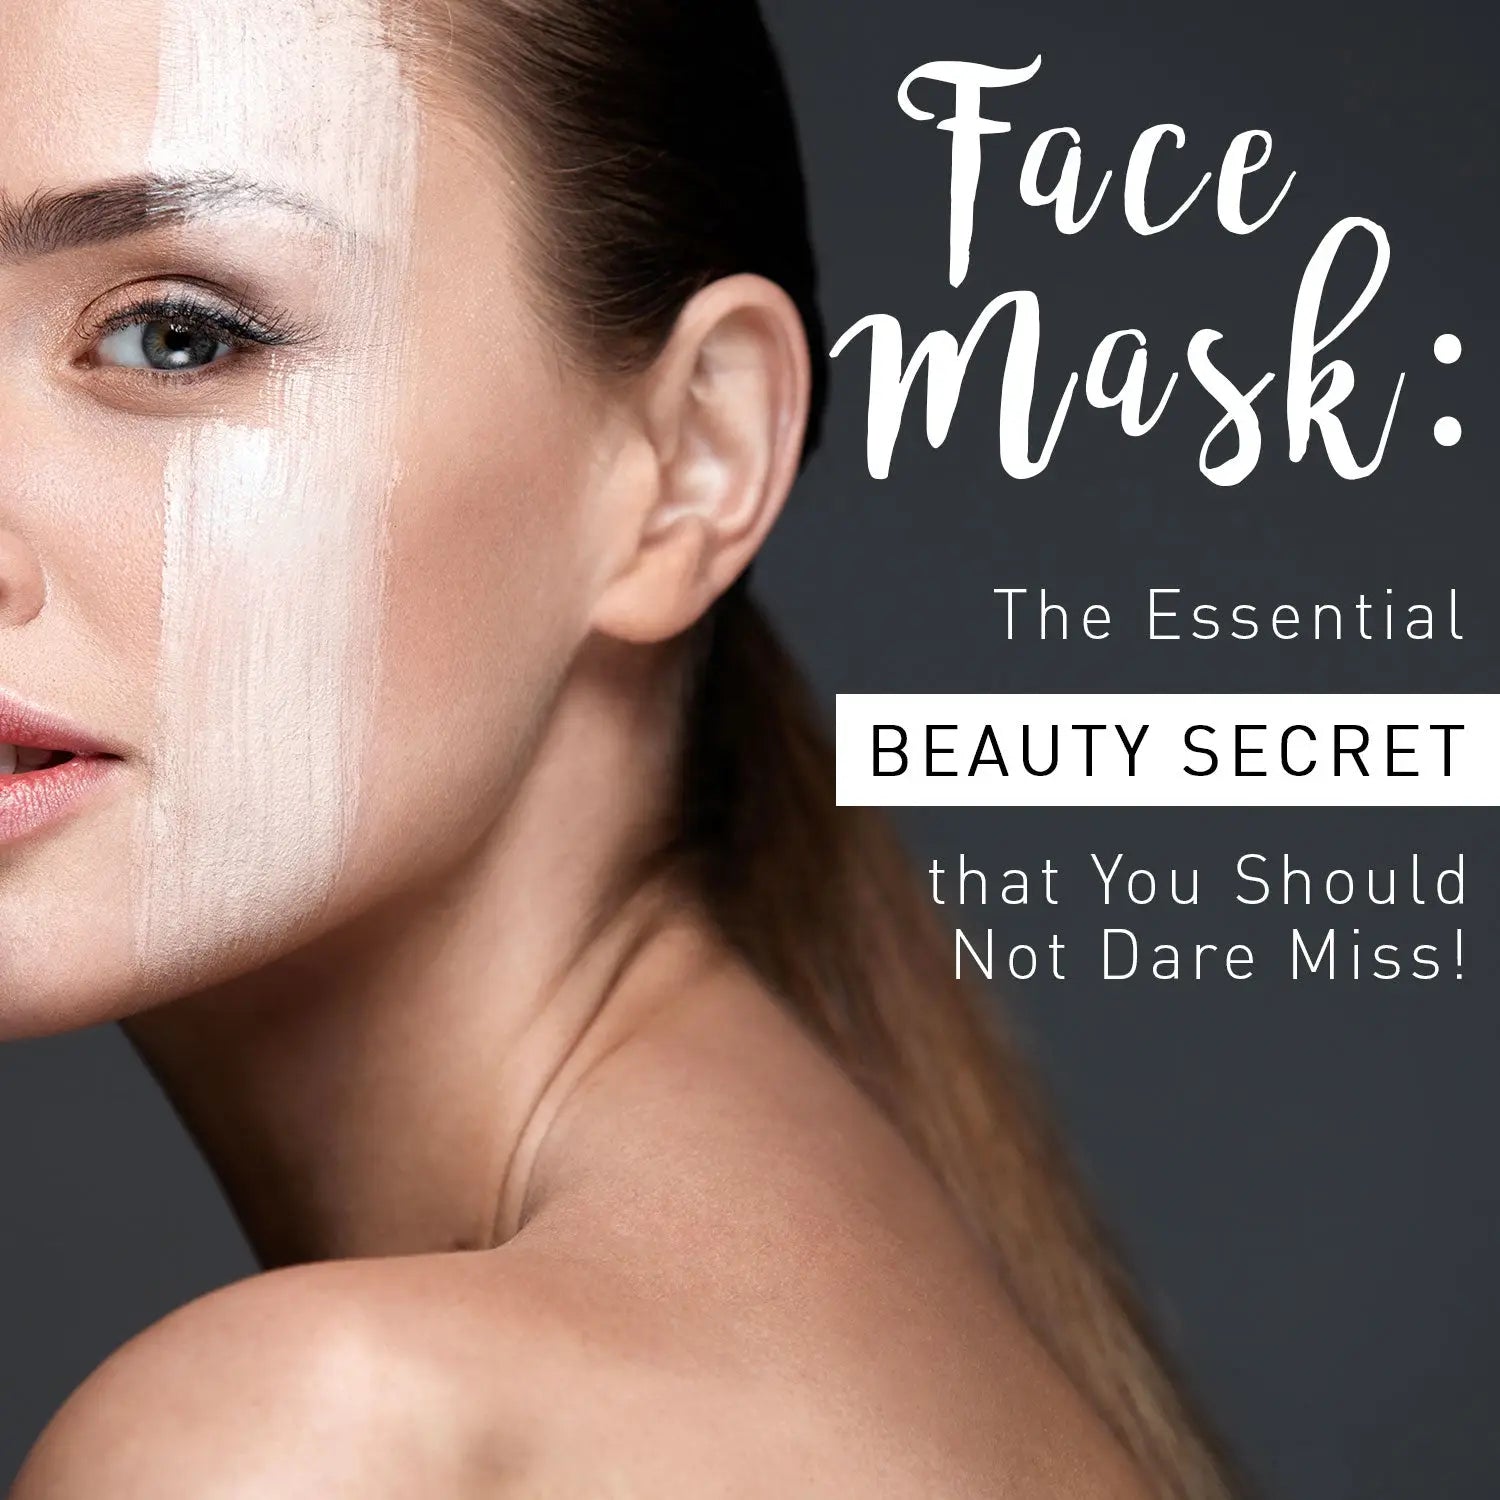 FACE MASK: THE ESSENTIAL BEAUTY SECRET THAT YOU SHOULD NOT DARE MISS!